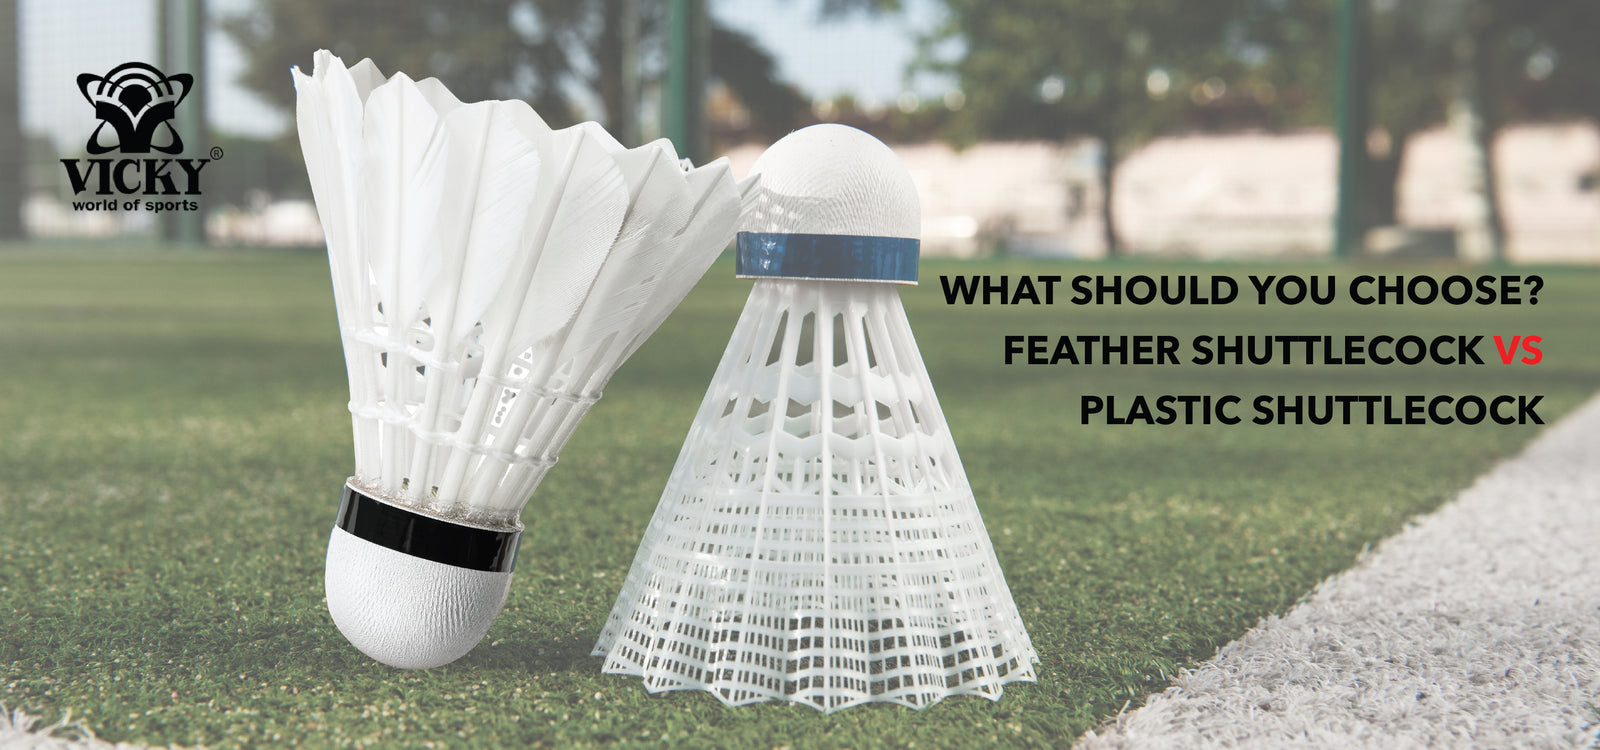 What should you choose between a Feather Shuttlecock or Plastic Shuttlecock?